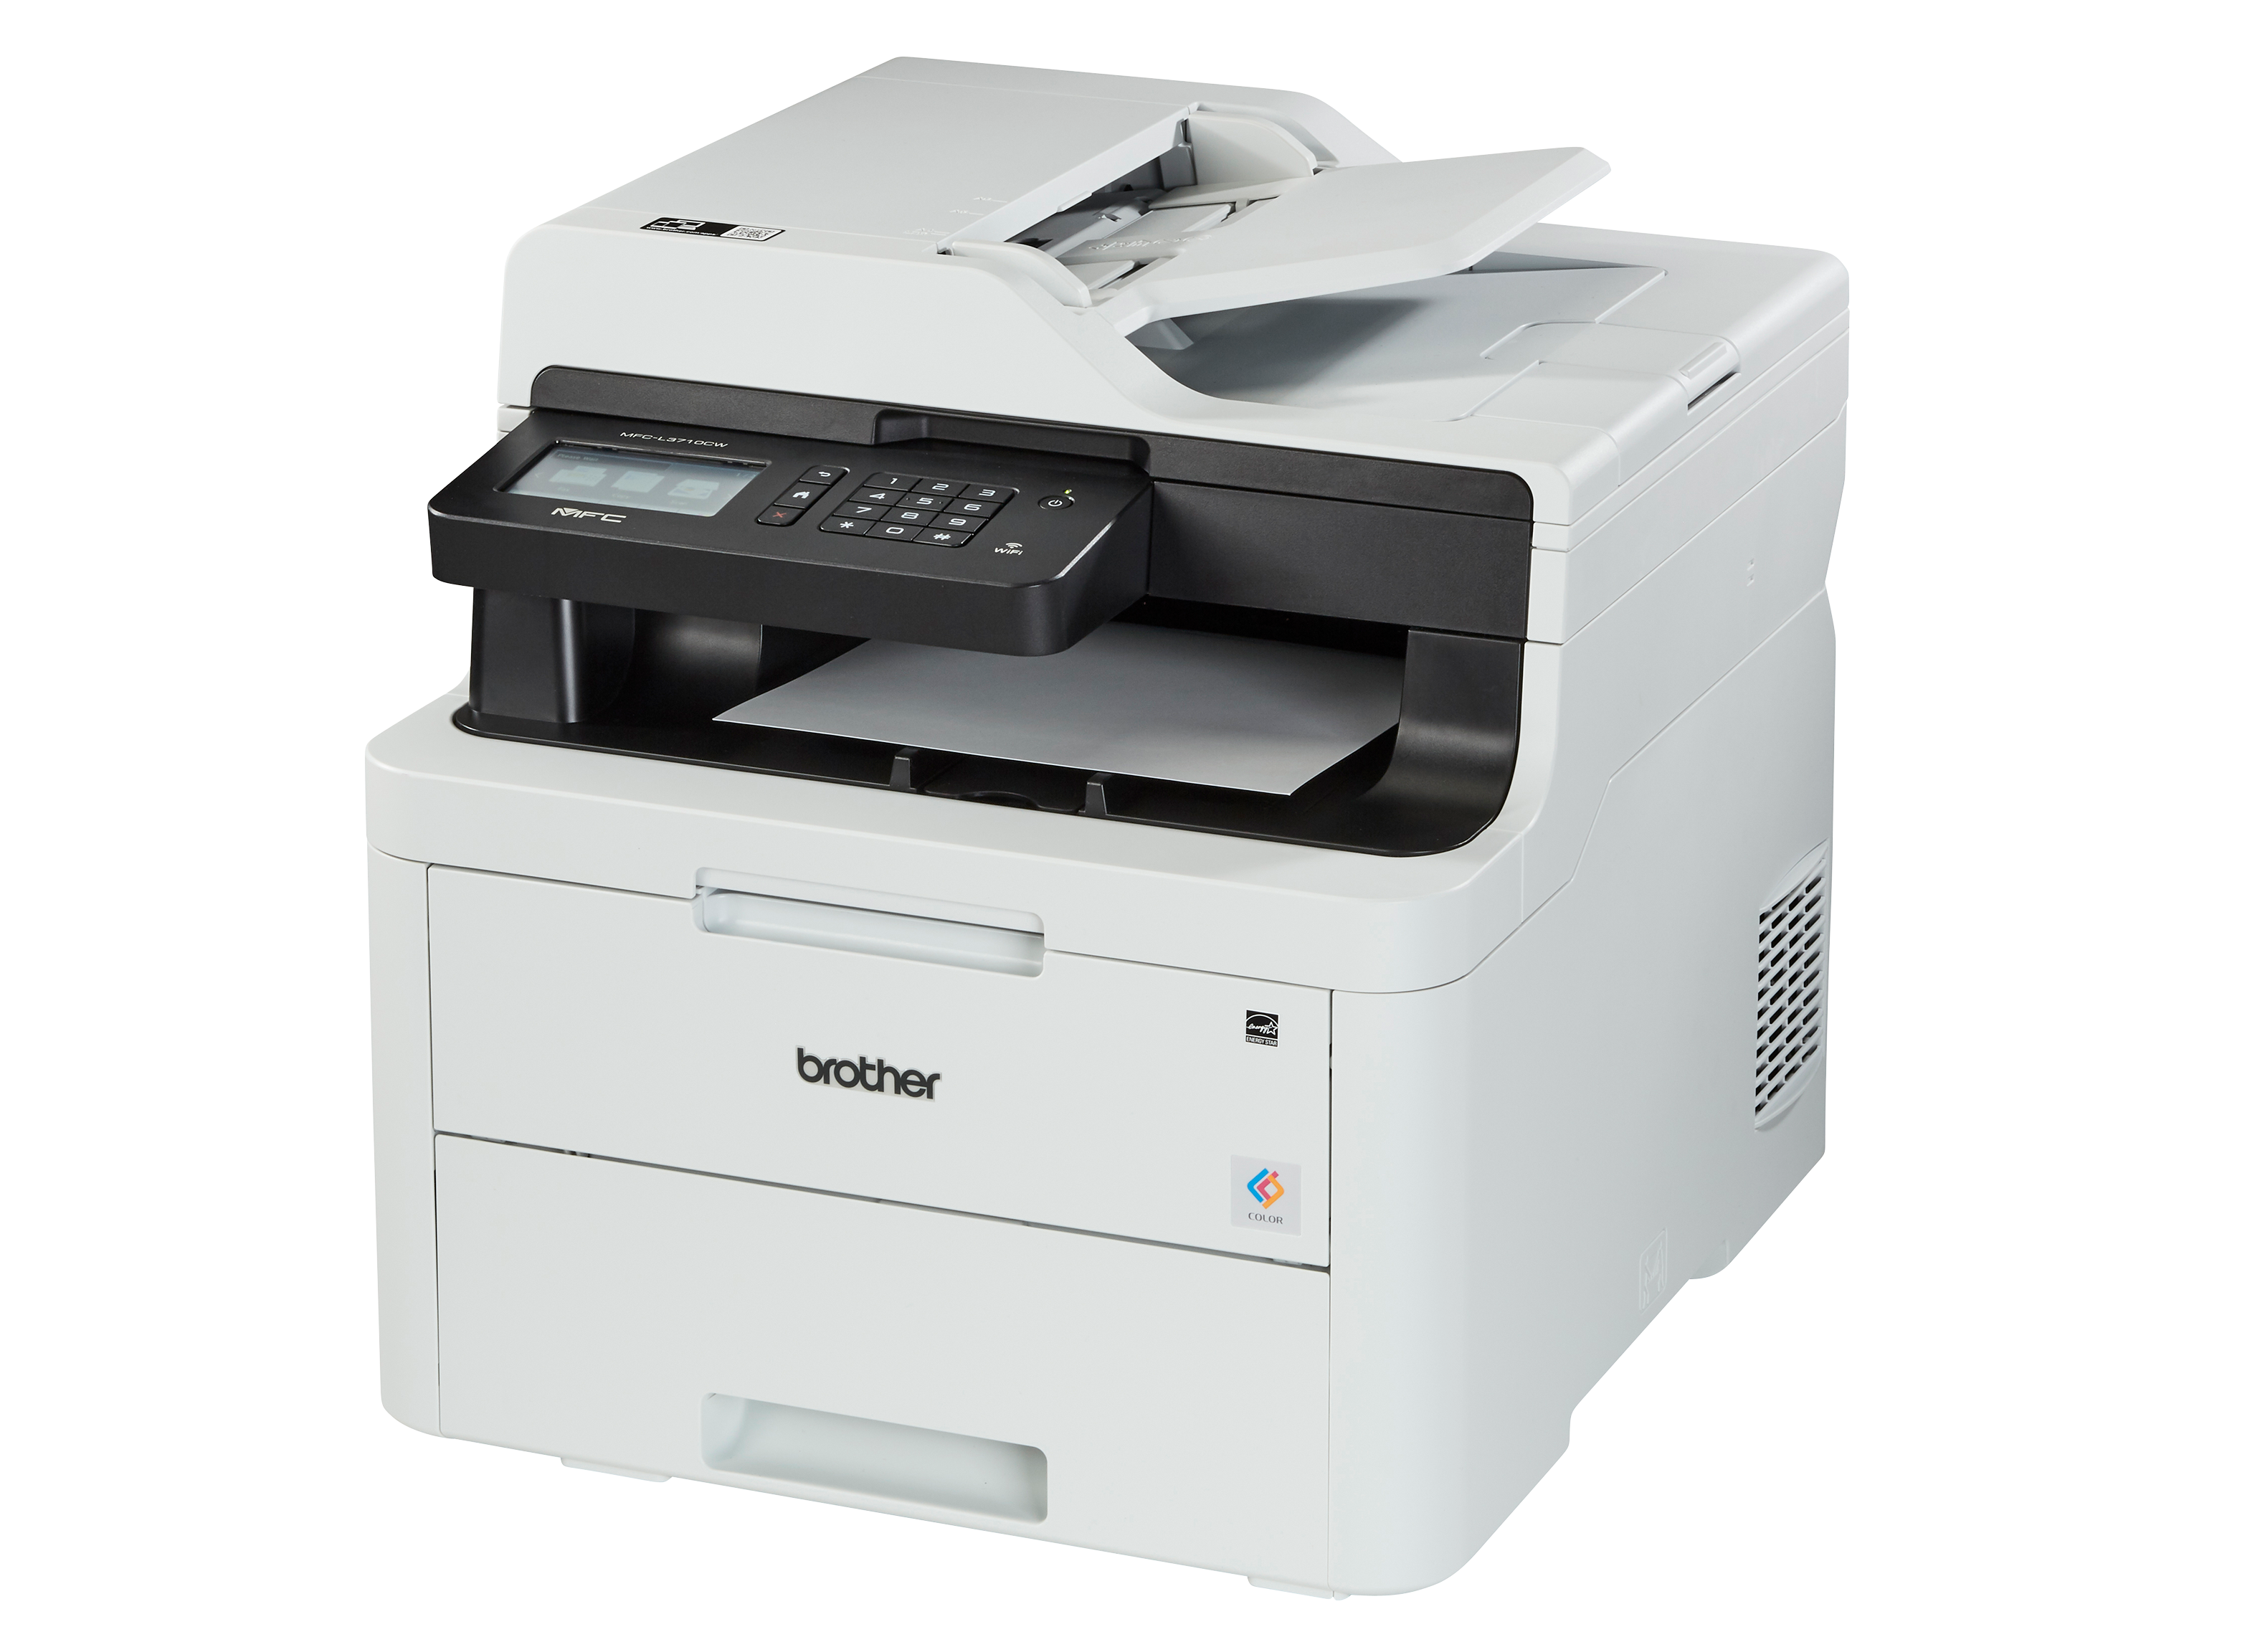 Brother MFC-L3710CW Printer Review - Reports